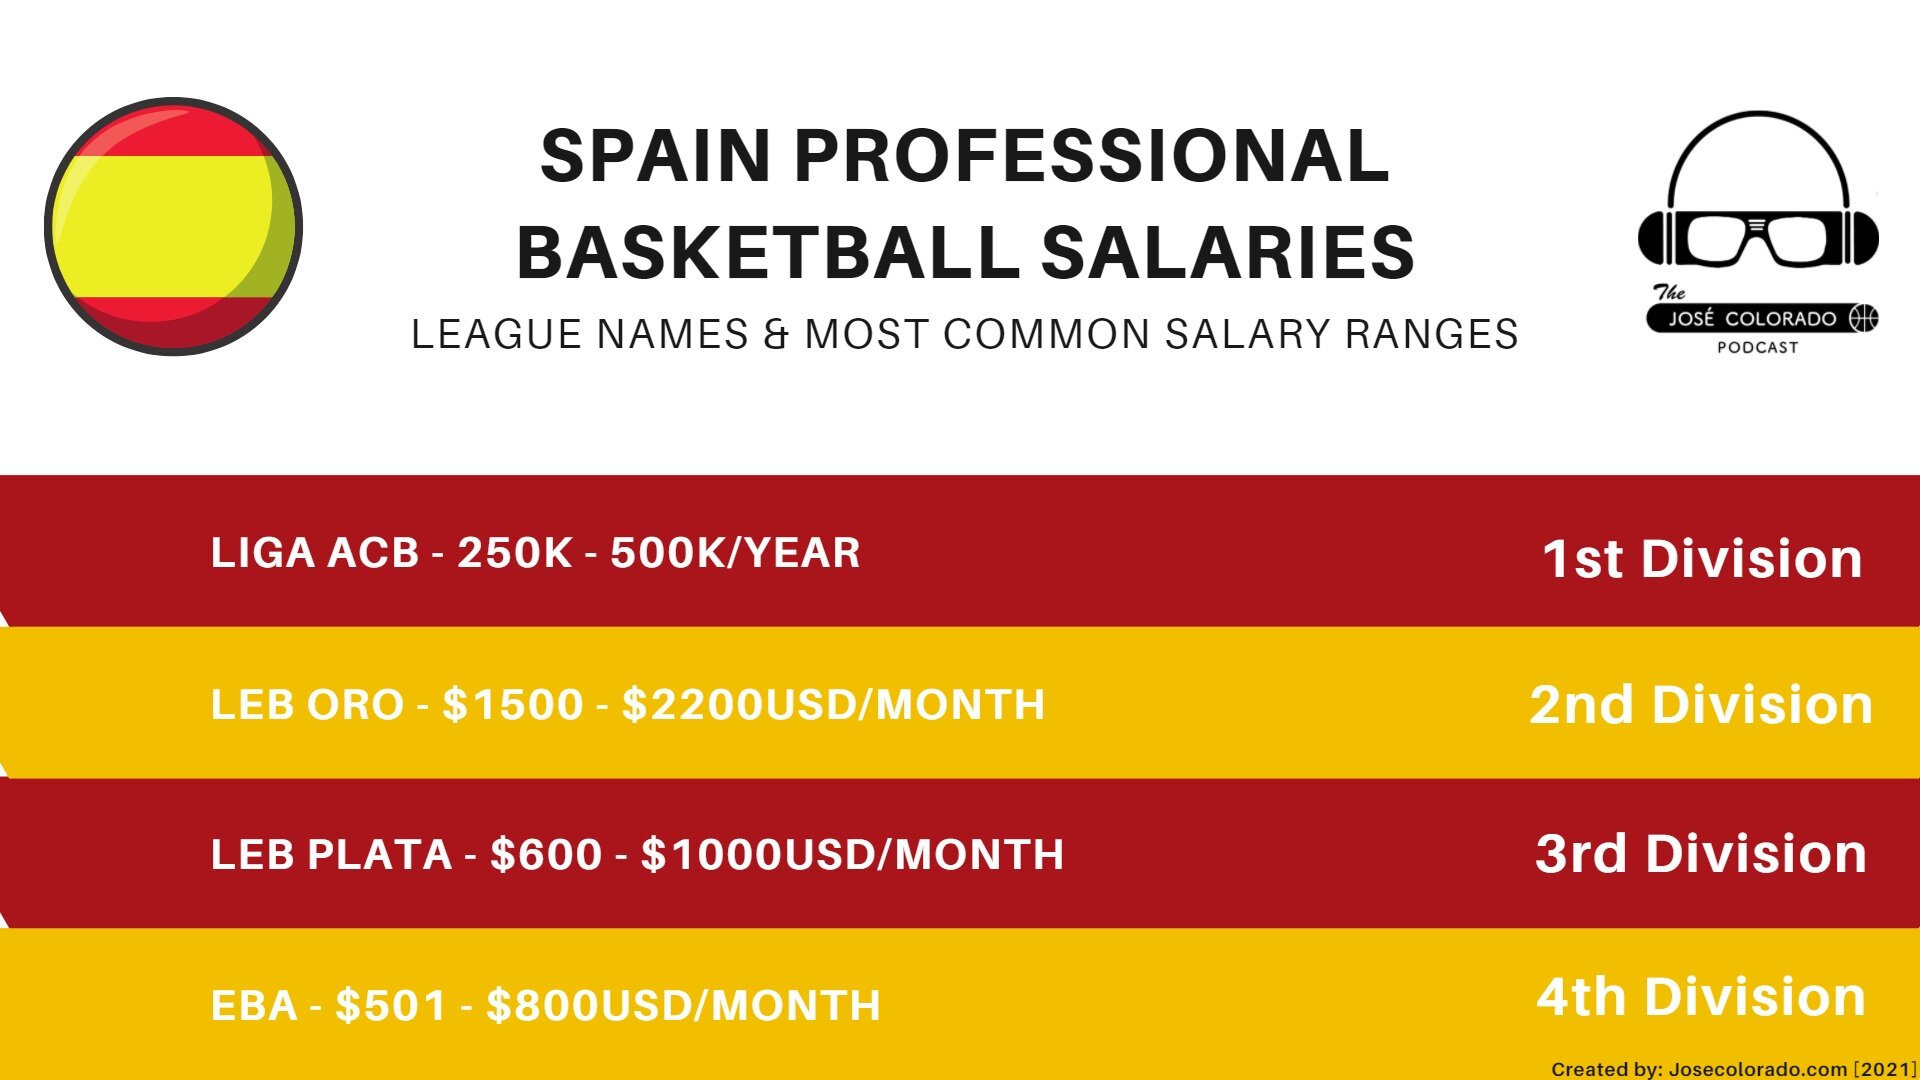 LEB Plata is the third-highest paying professional basketball league in Spain.